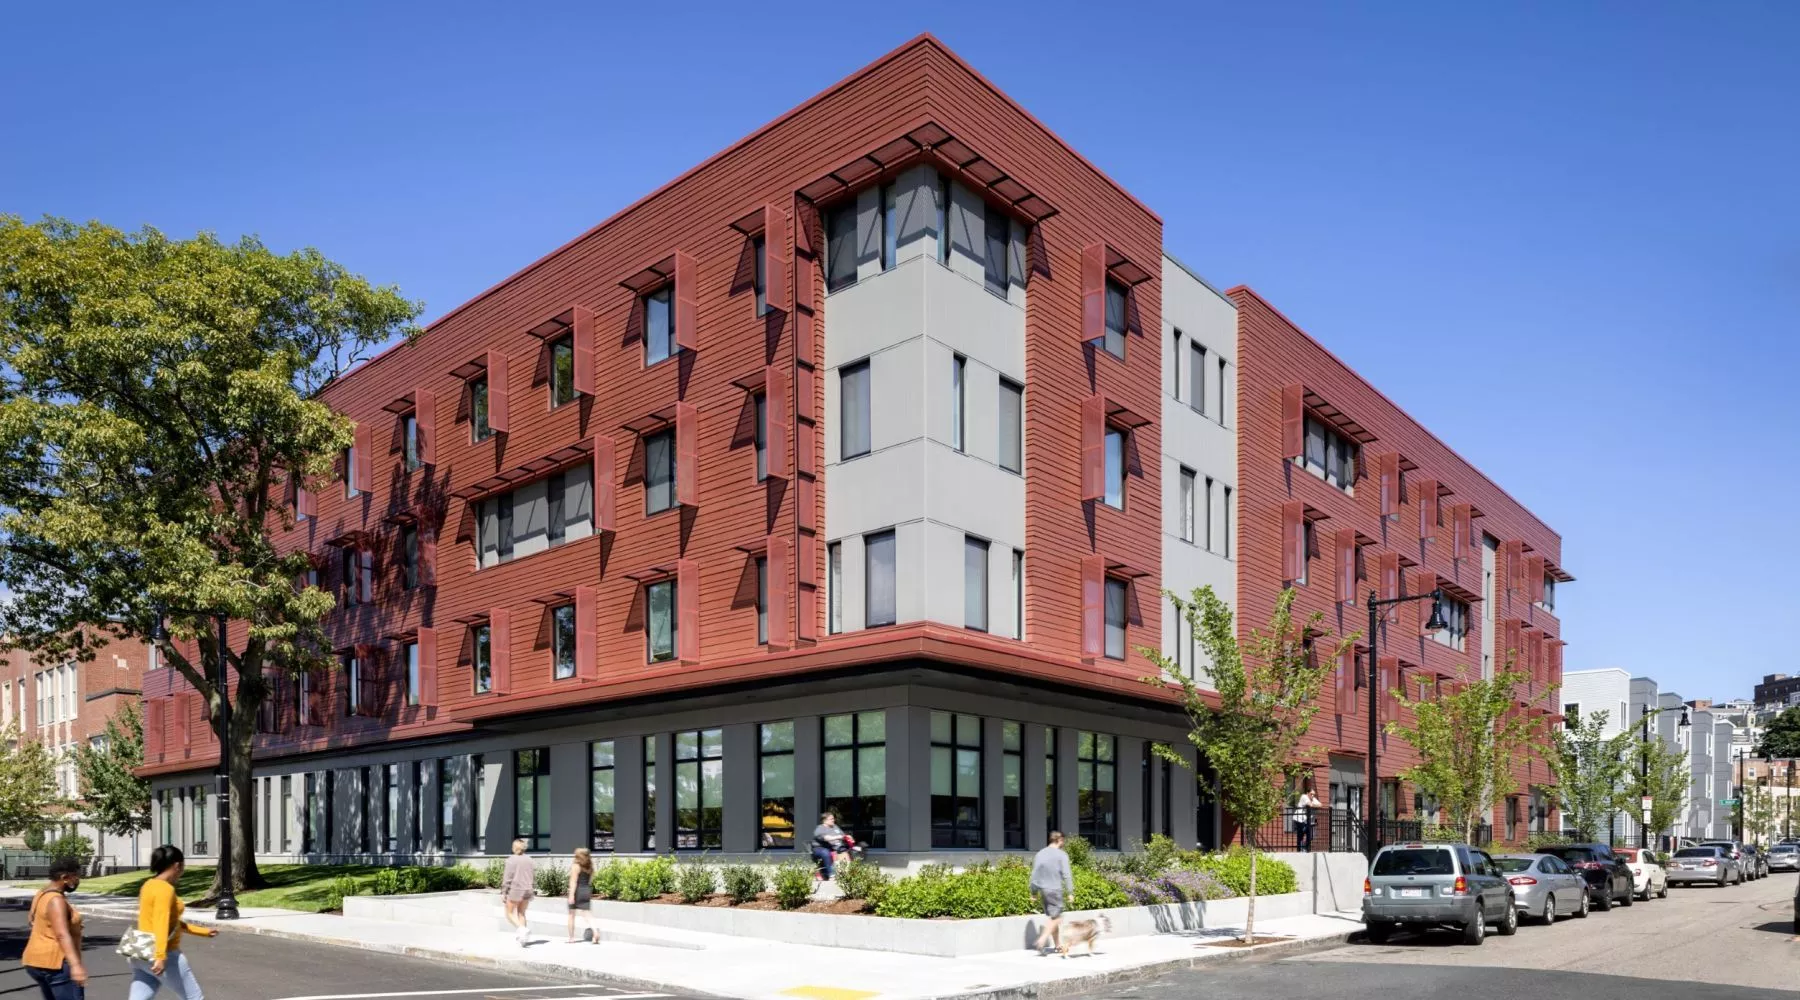 Passive House affordable senior housing project opens in Boston Anne M. Lynch Homes at Old Colony Phase 3 Photo  Ed Wonsek